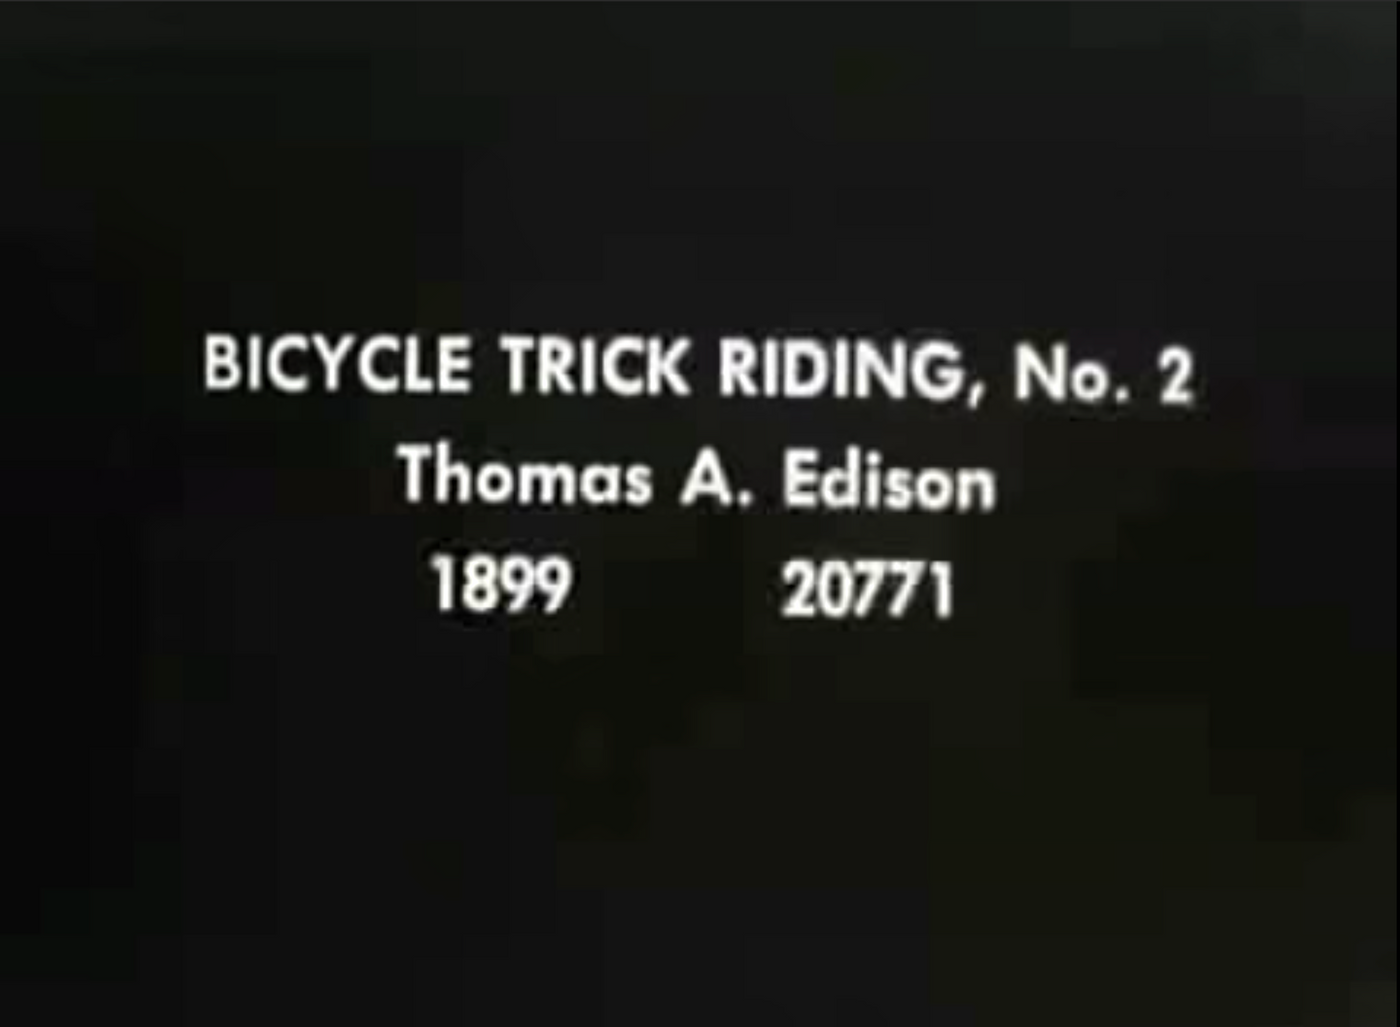 History : Is this the First Bicycle Trick Tape?